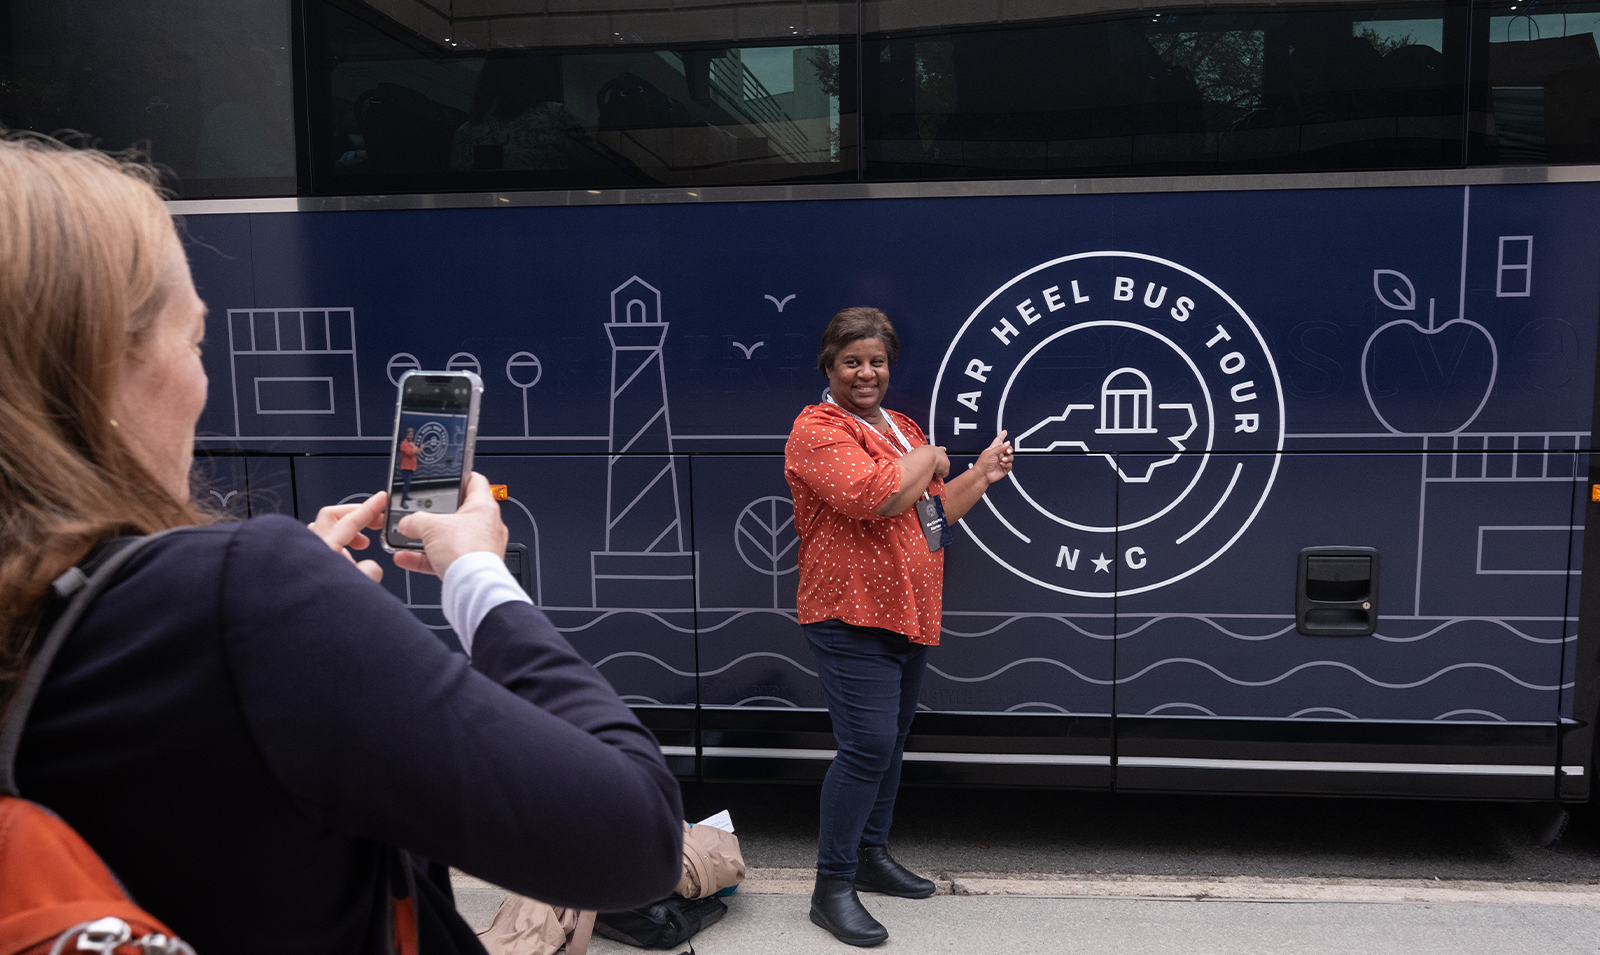 A person using an iPhone to take a picture of a woman posing next to a large bus and pointing to the 